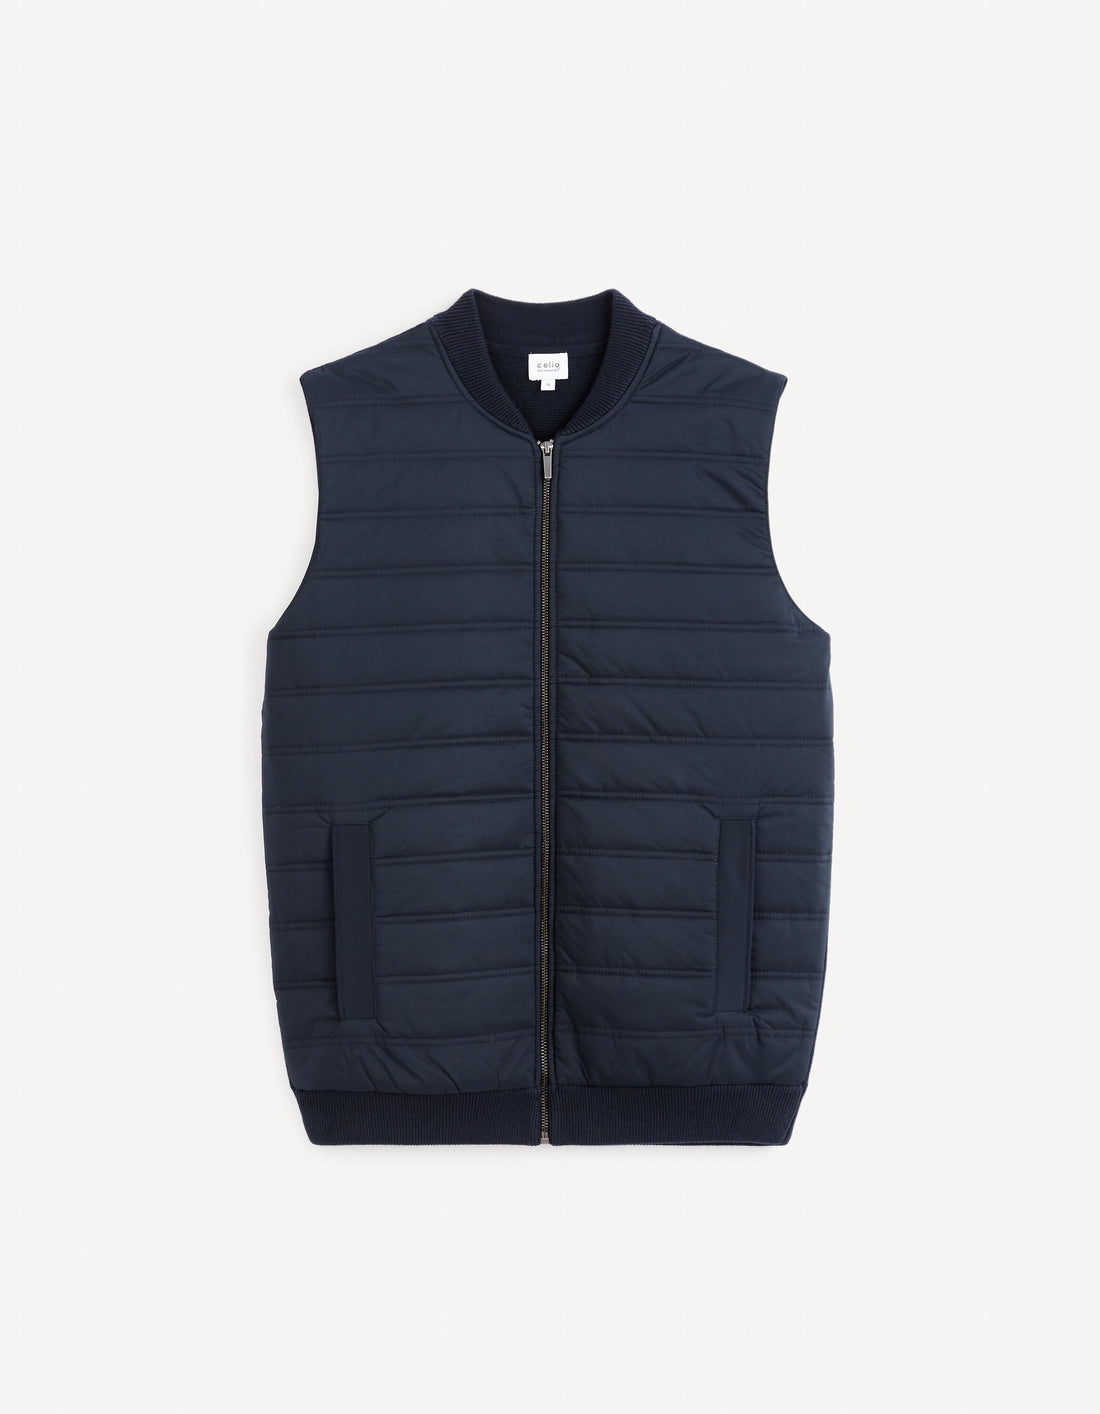 Sleeveless Puffer Jacket? 100% Cotton - Navy_FENORDICA_ENCRE FONCE_01